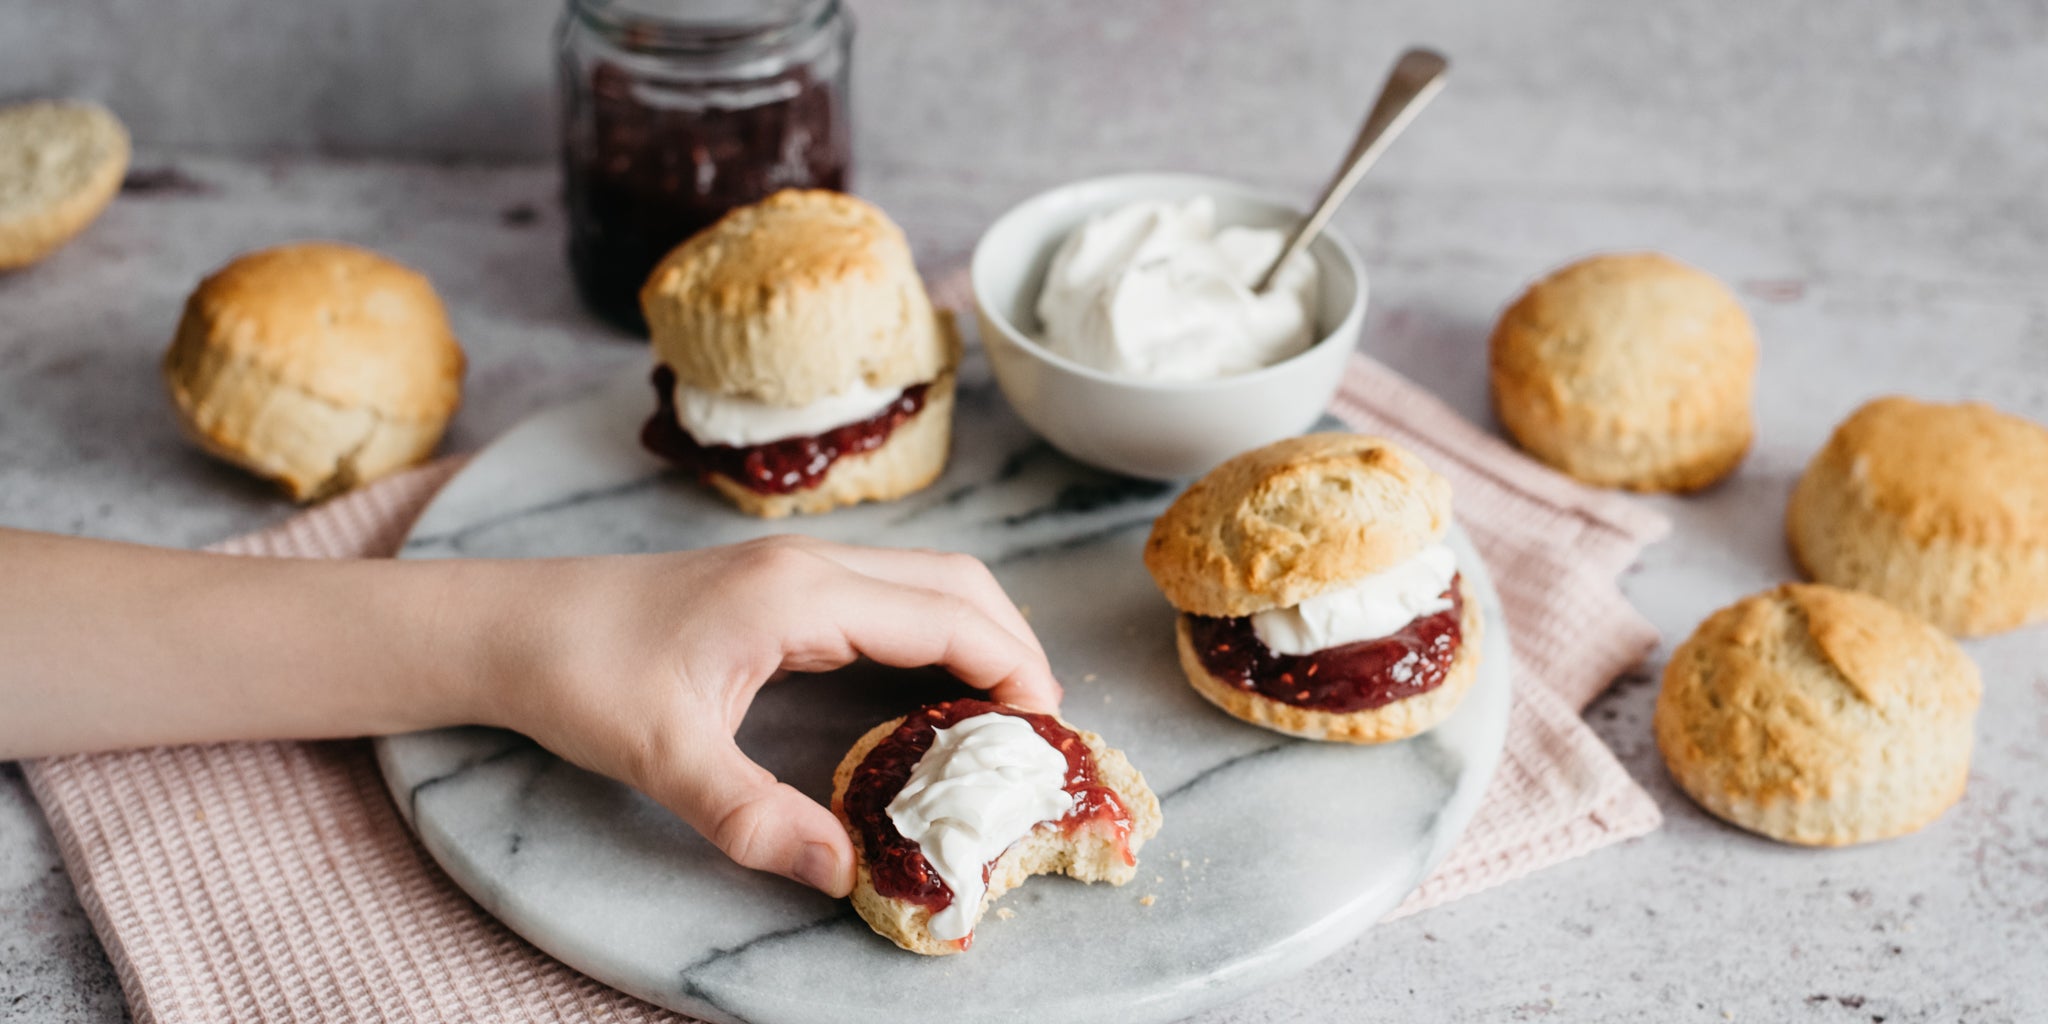 Hand reaching for a Vegan Scone cut in half with jam and plant based whipped cream, next to a bowl of vegan cream and jam